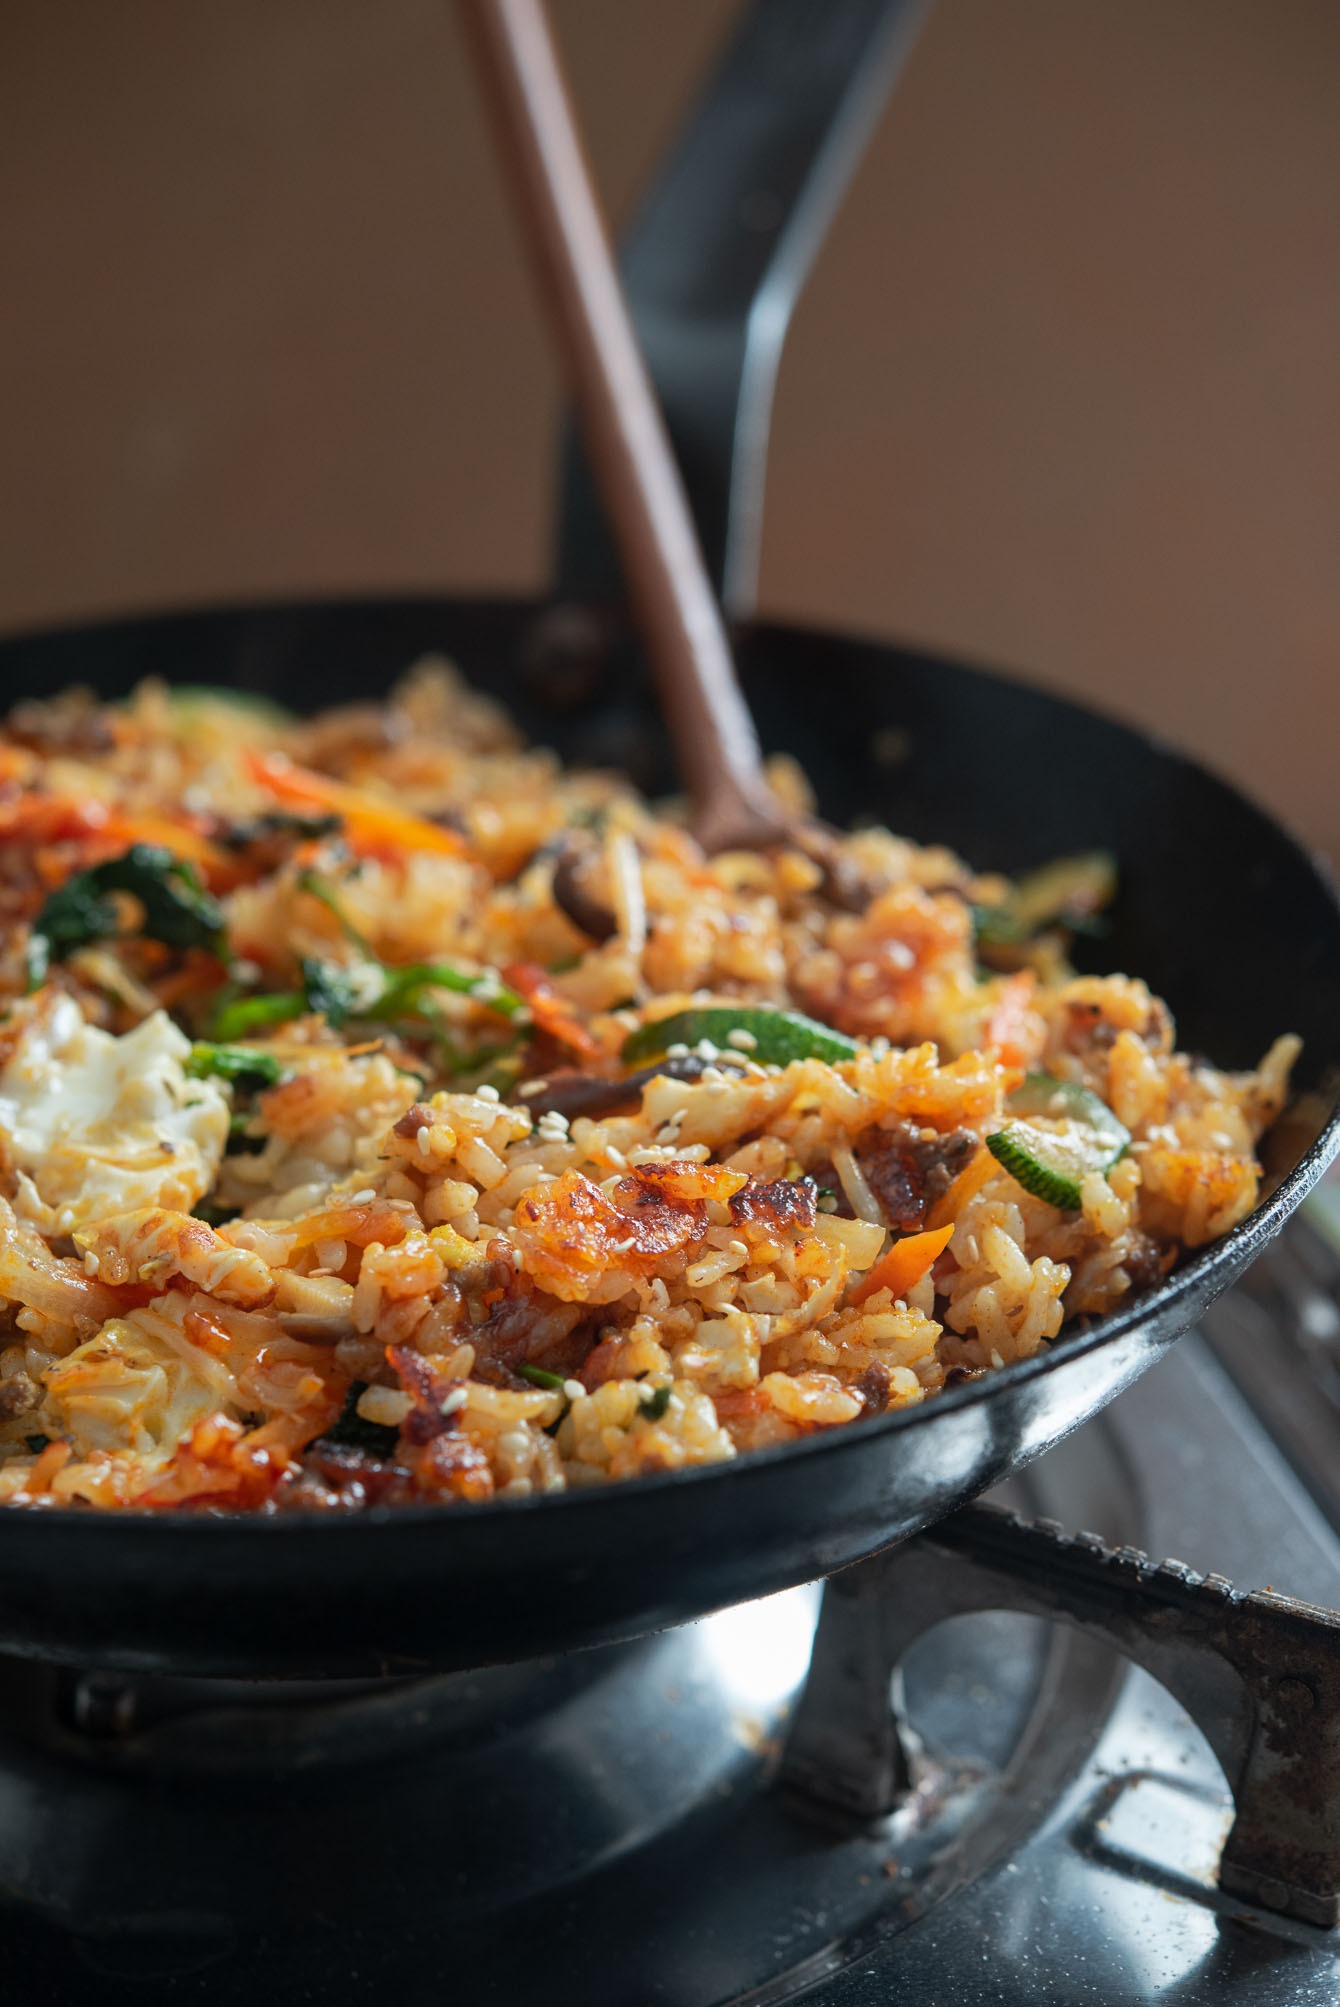 Dolsot style bibimbap is made in a skillet